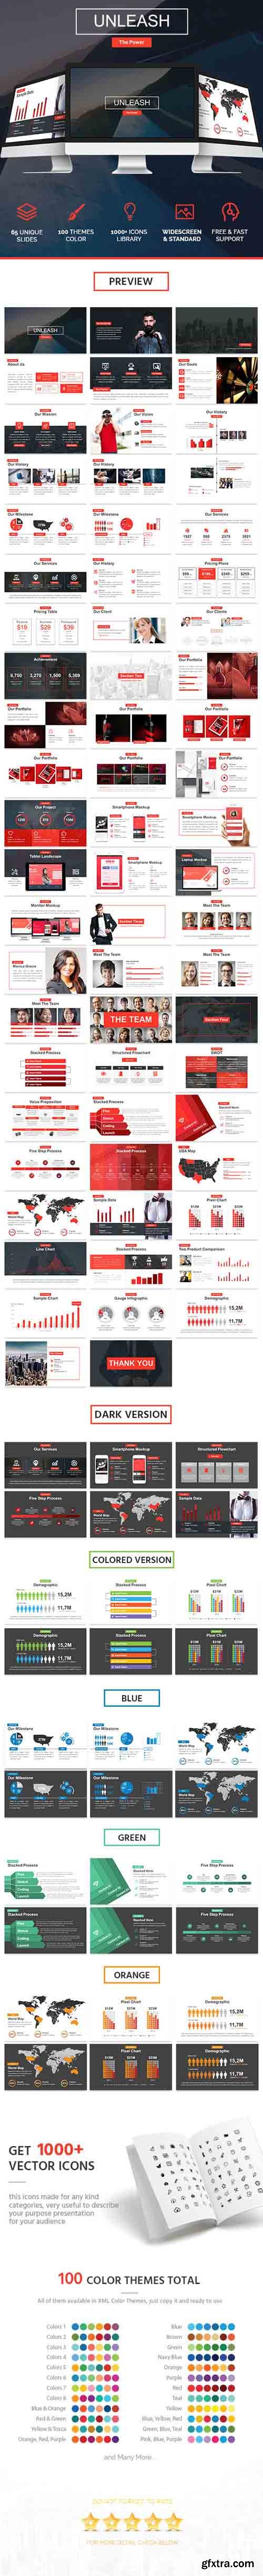 GR - Unleash Powerpoint Template - Relase the Power! 17564307